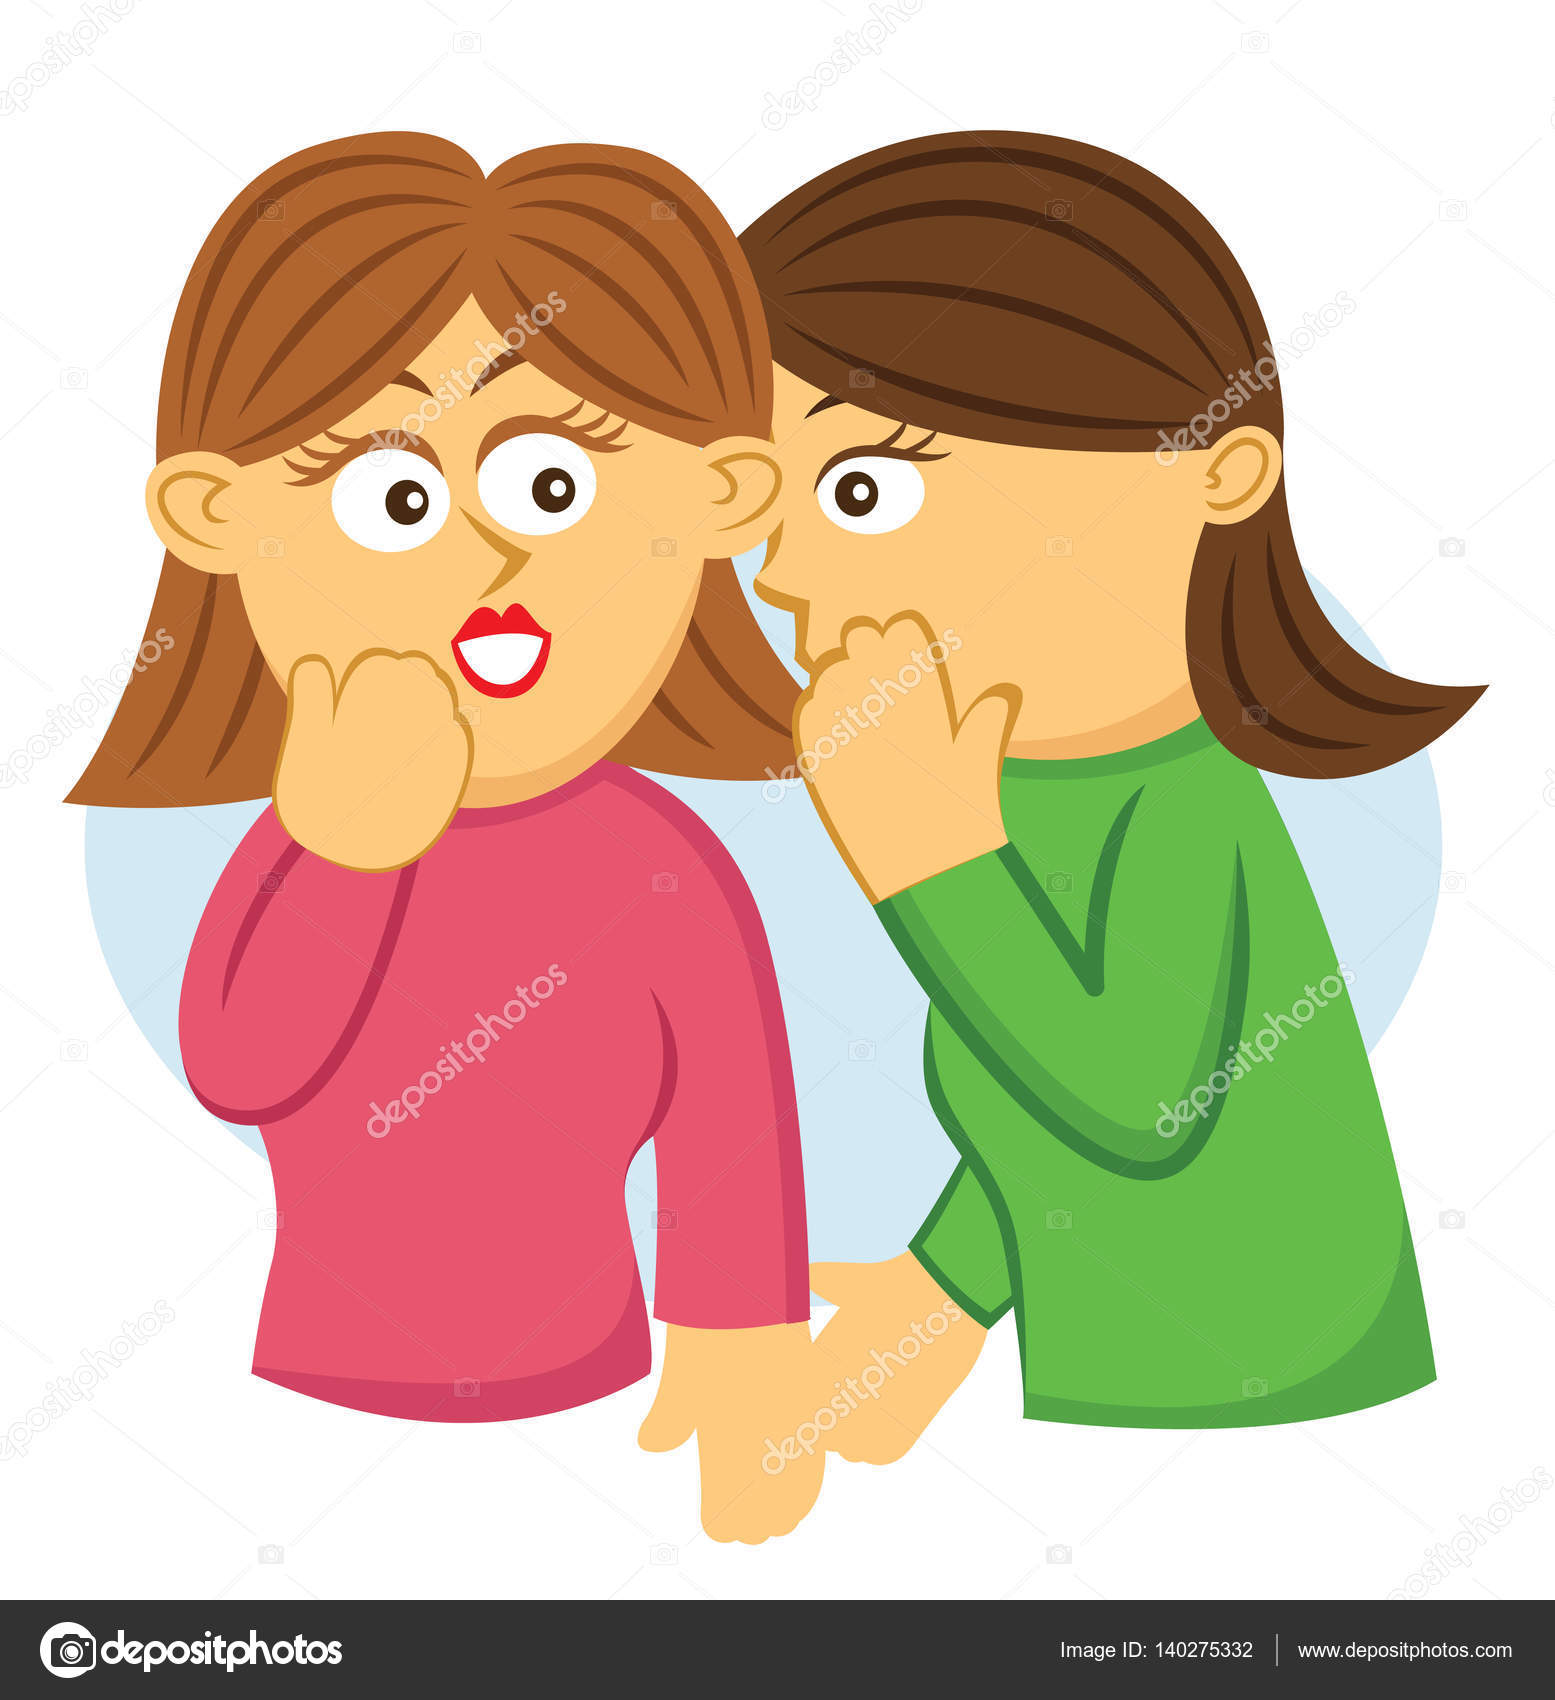 Two Girls Gossiping Cartoon Illustration Isolated On White Vector Image By C Anggar3ind Vector Stock